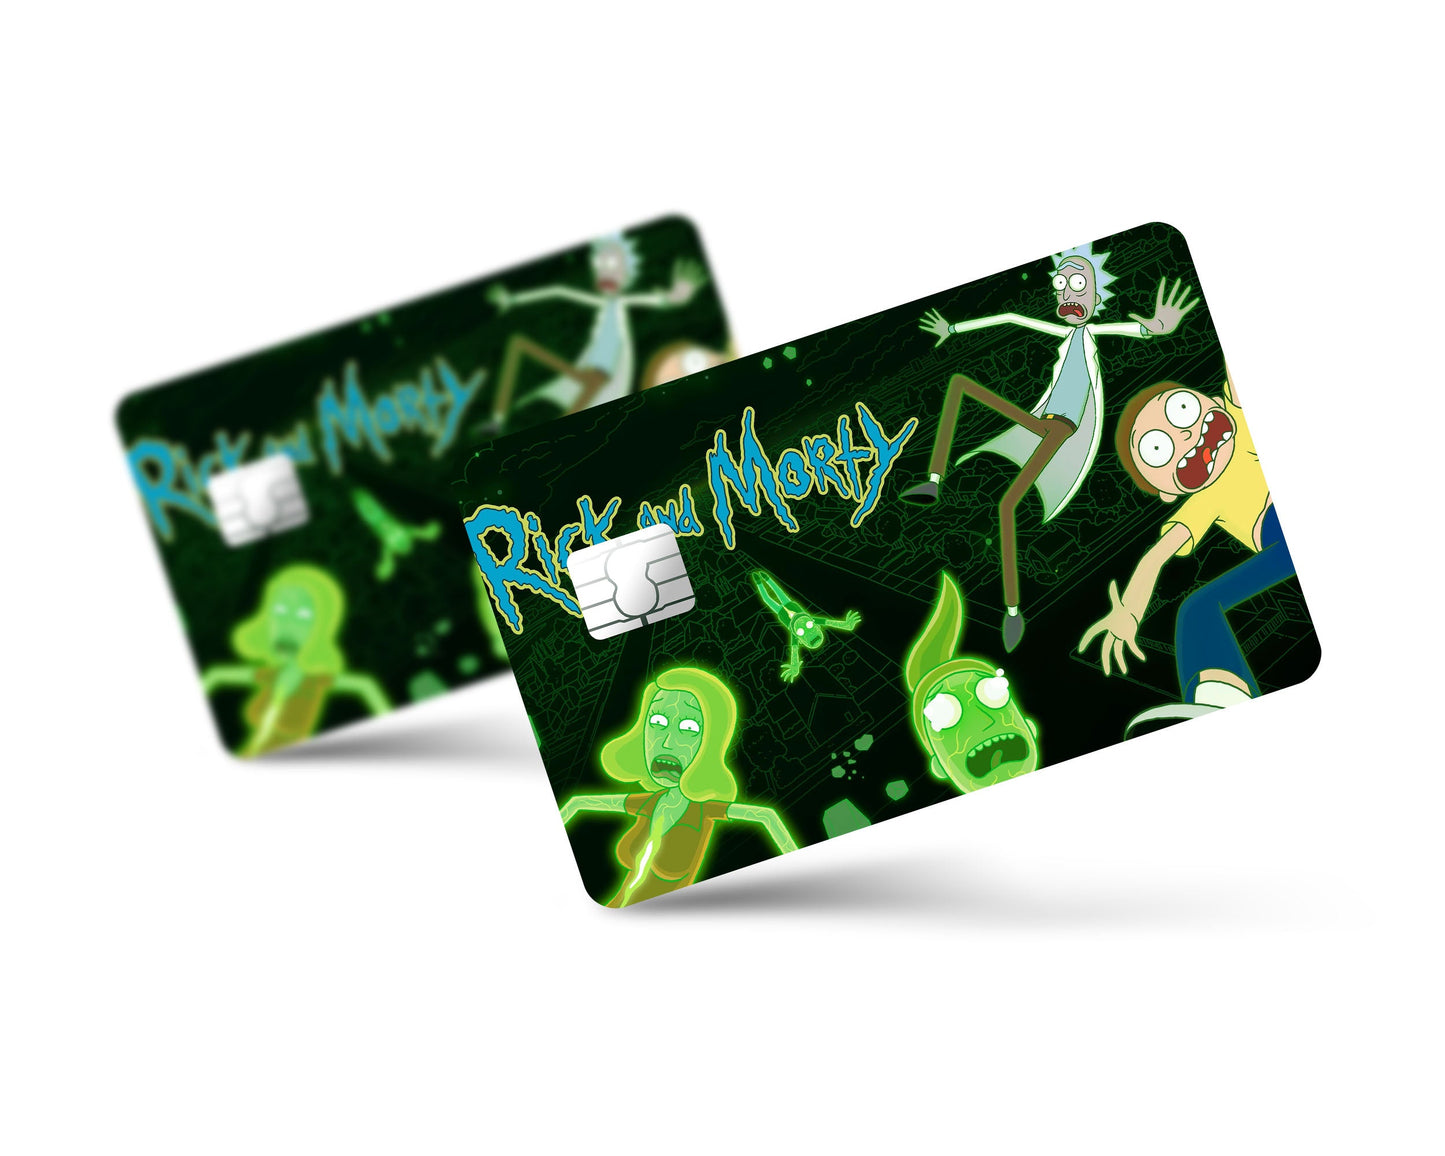 Anime Town Creations Credit Card Rick and Morty Intro Full Skins - Anime Rick and Morty Credit Card Skin